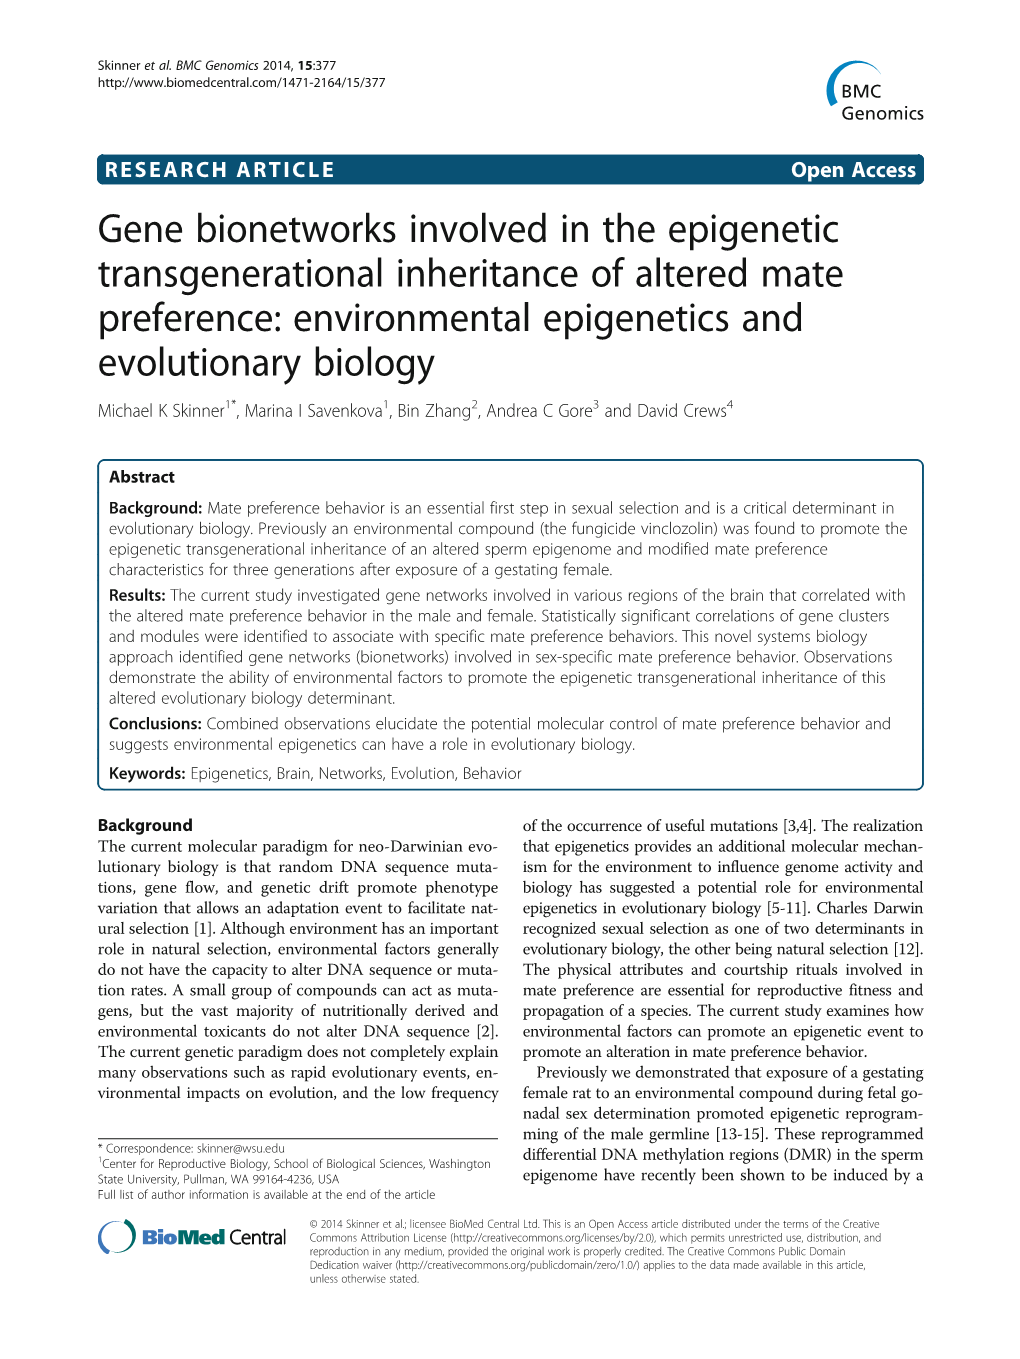 Gene Bionetworks Involved in the Epigenetic